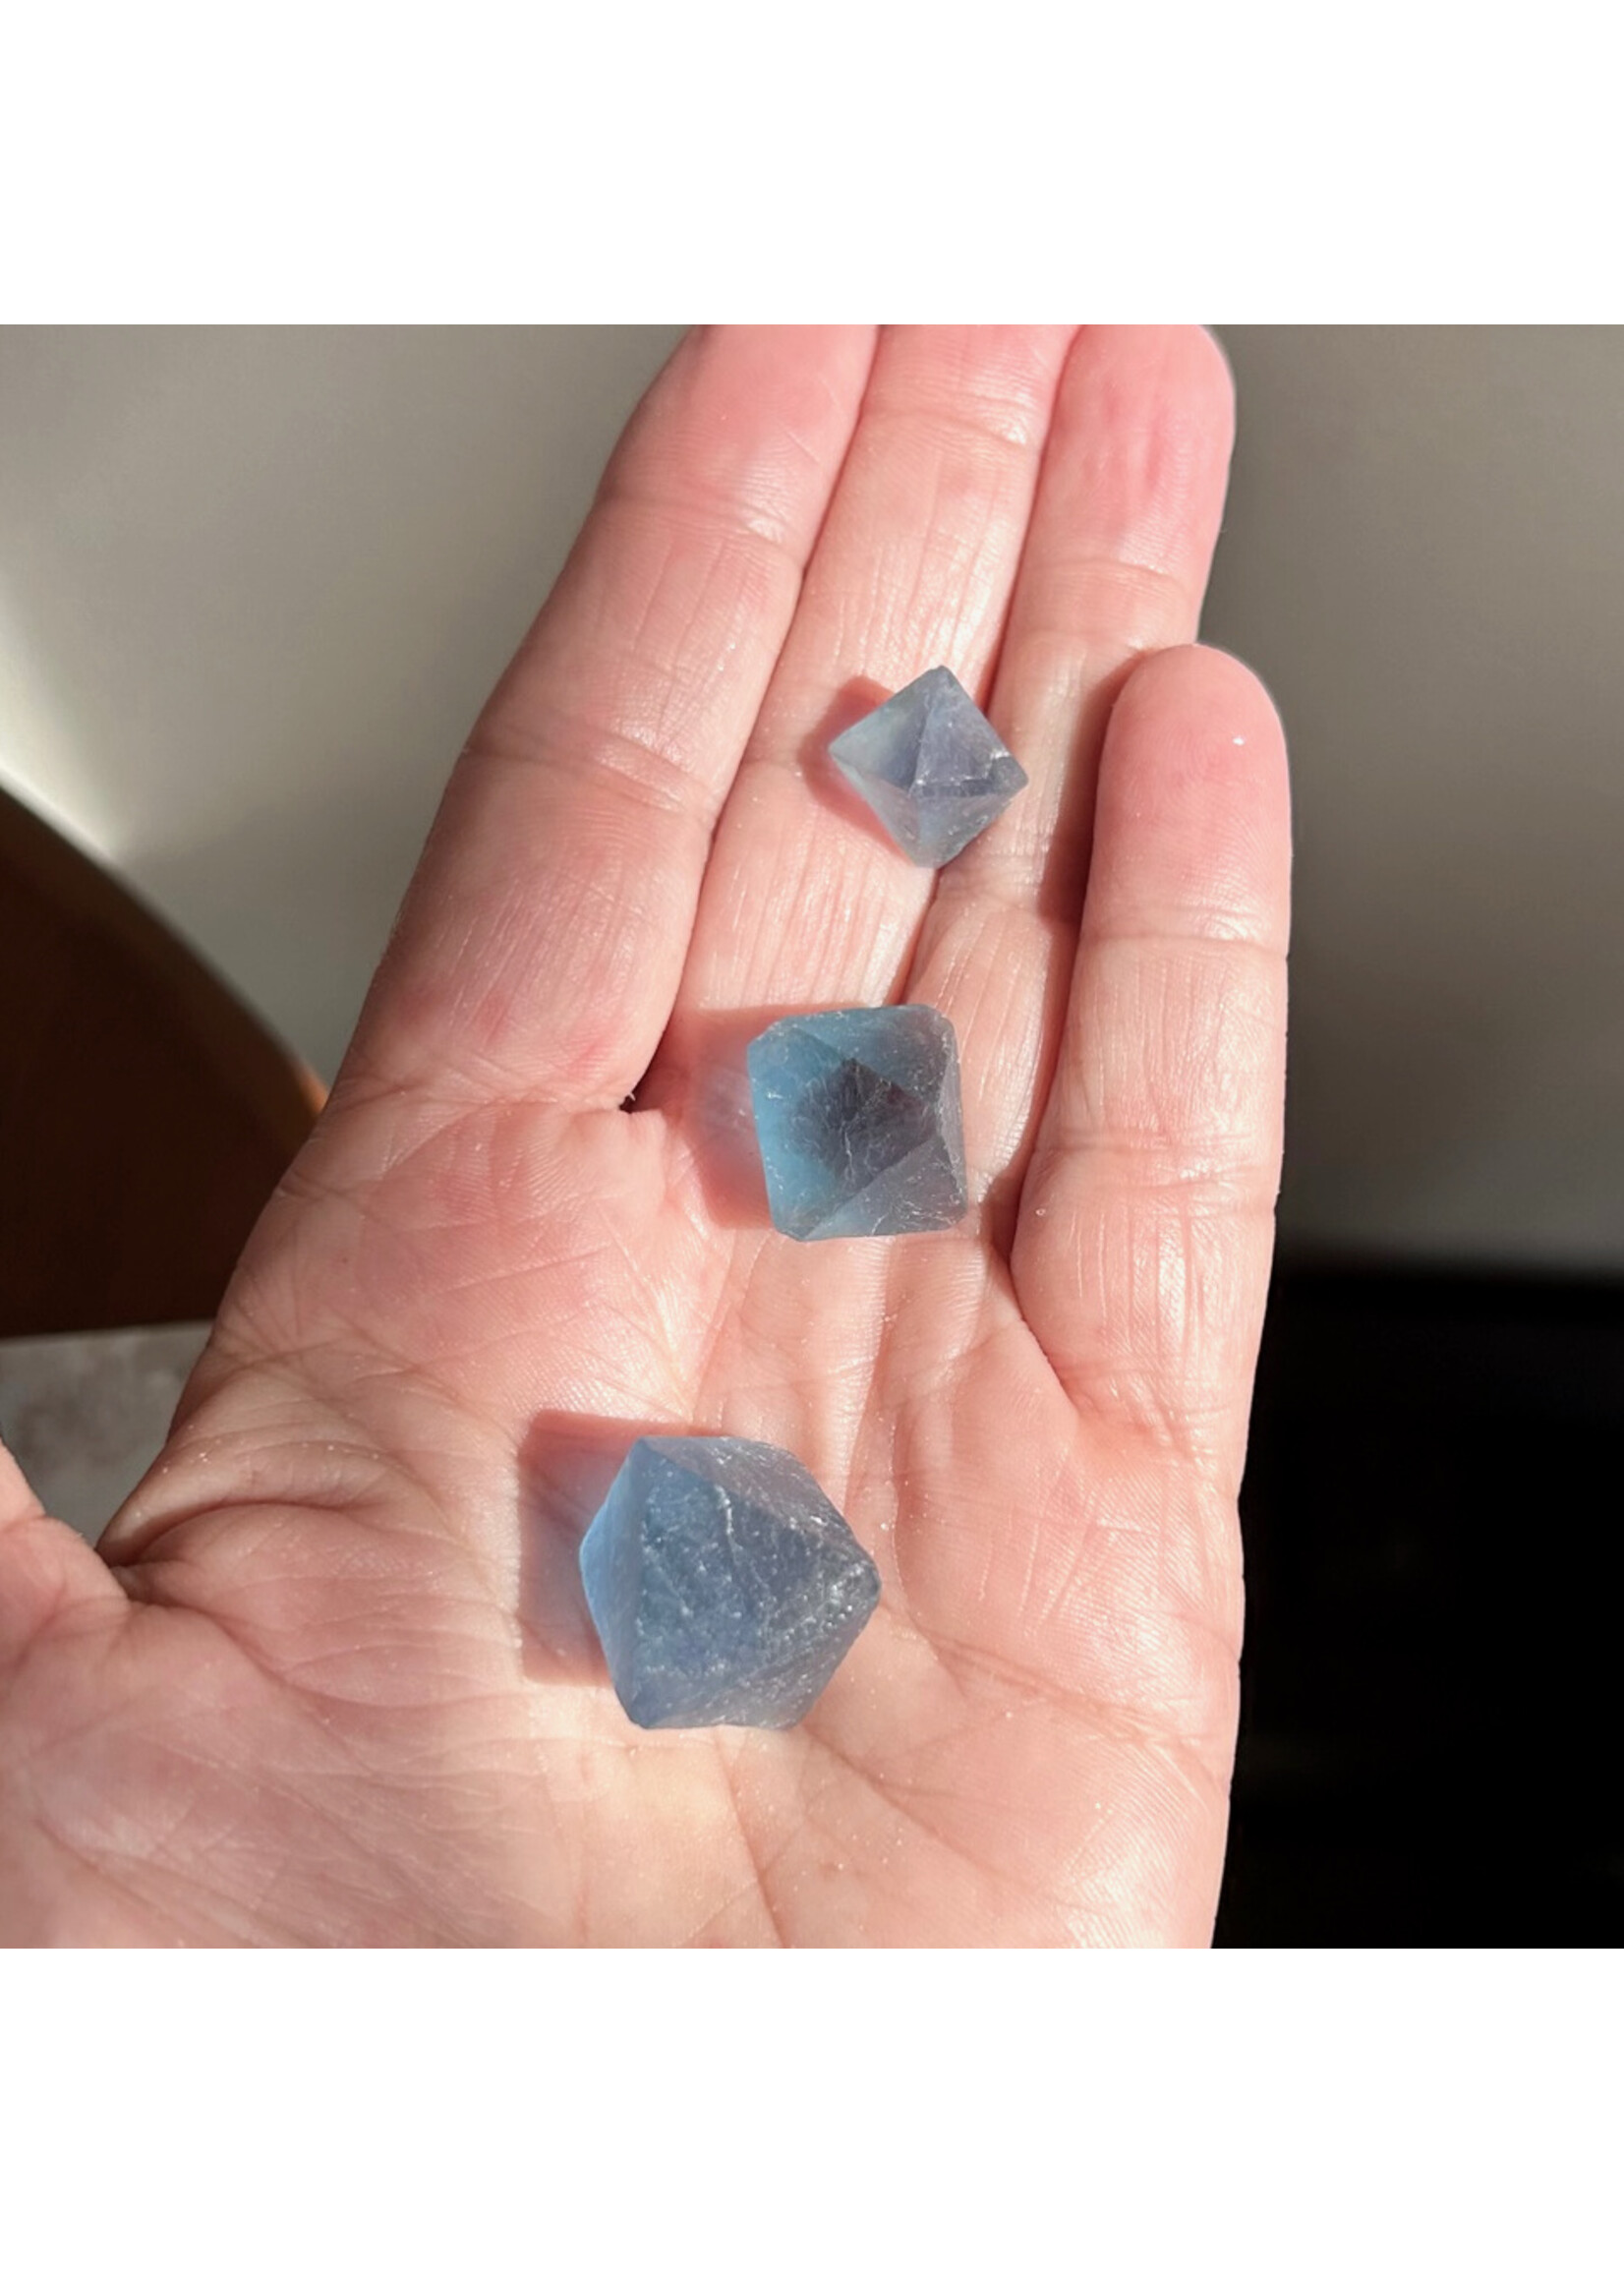 Blue Fluorite Octahedrons for guiding your soul's purpose